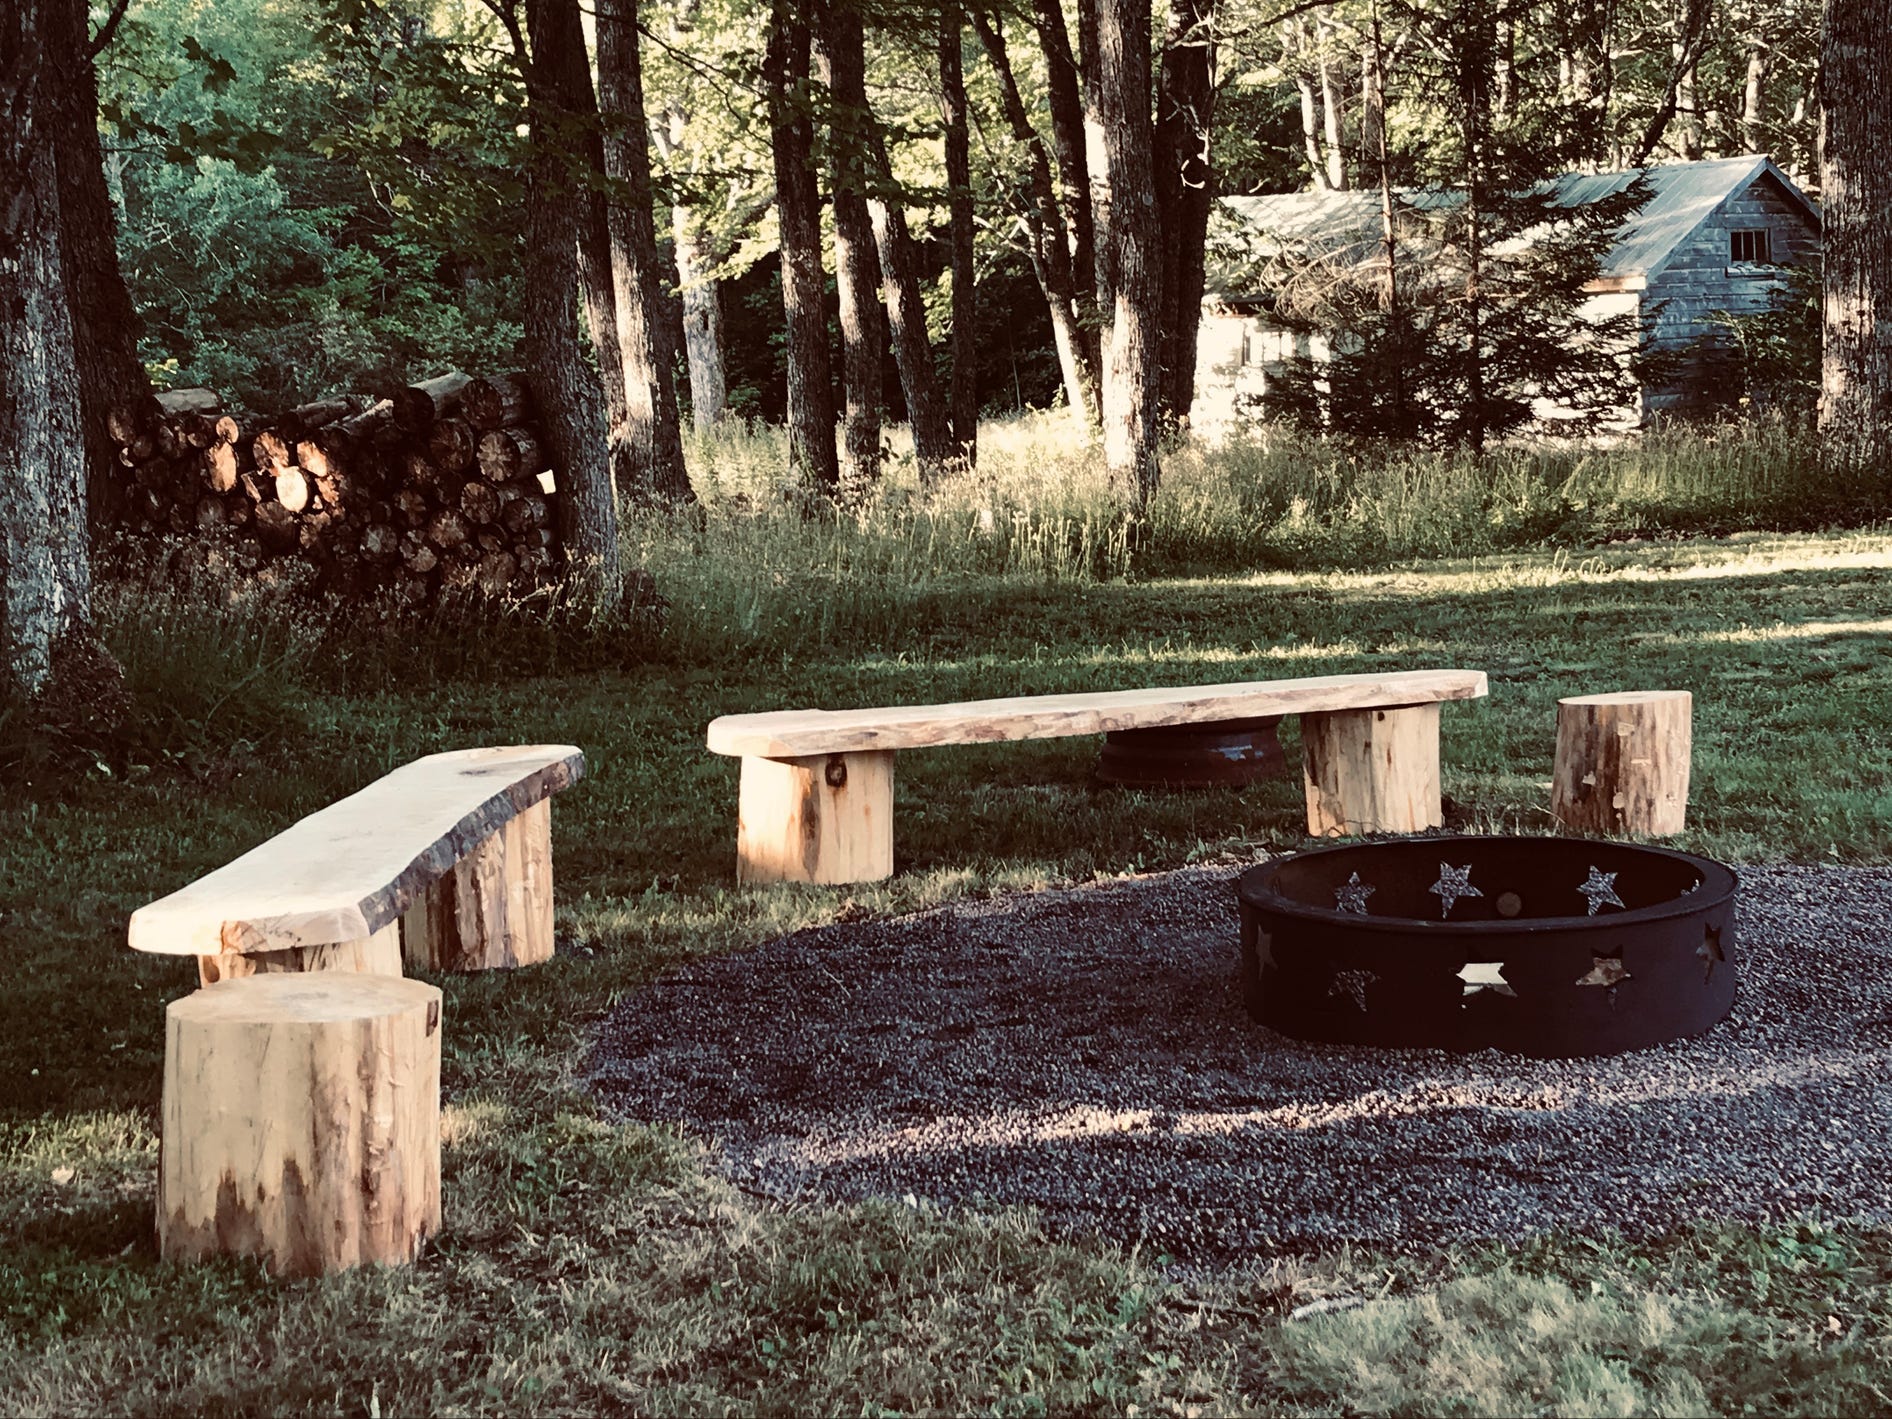 A fire pit in a wooded clearing surrounded by wooden benches and tree stump tables